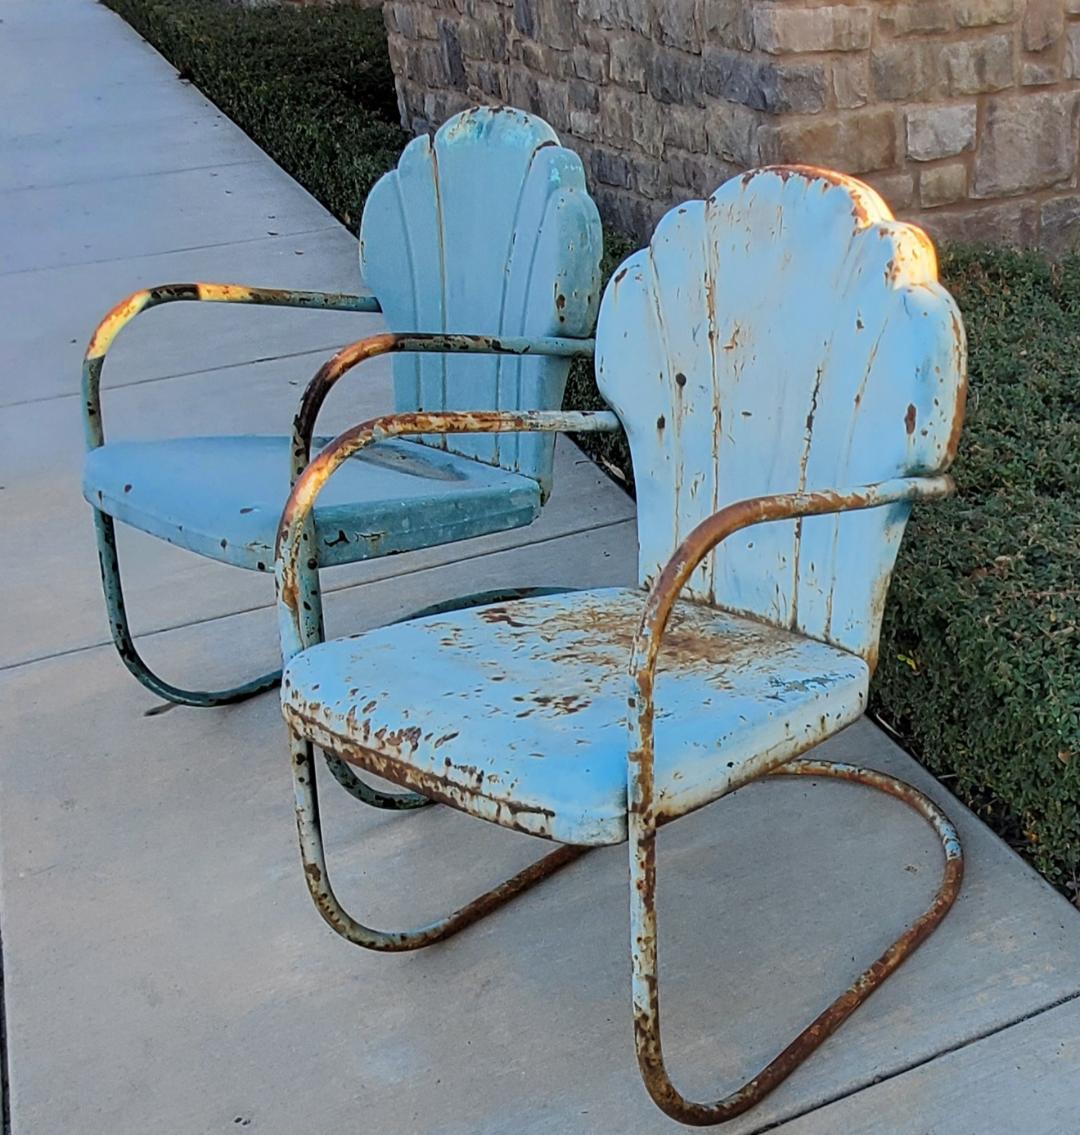 1940s Original Metal Clamshell Shellback Patio Lawn Chairs Mid Century Modern.
These Chairs Are In Excellent Vintage Condition.
 It Is In Original Found Condition And Has Been In My Back Yard For Over 35 Years. 
I Have Taken Many Photos For Viewing